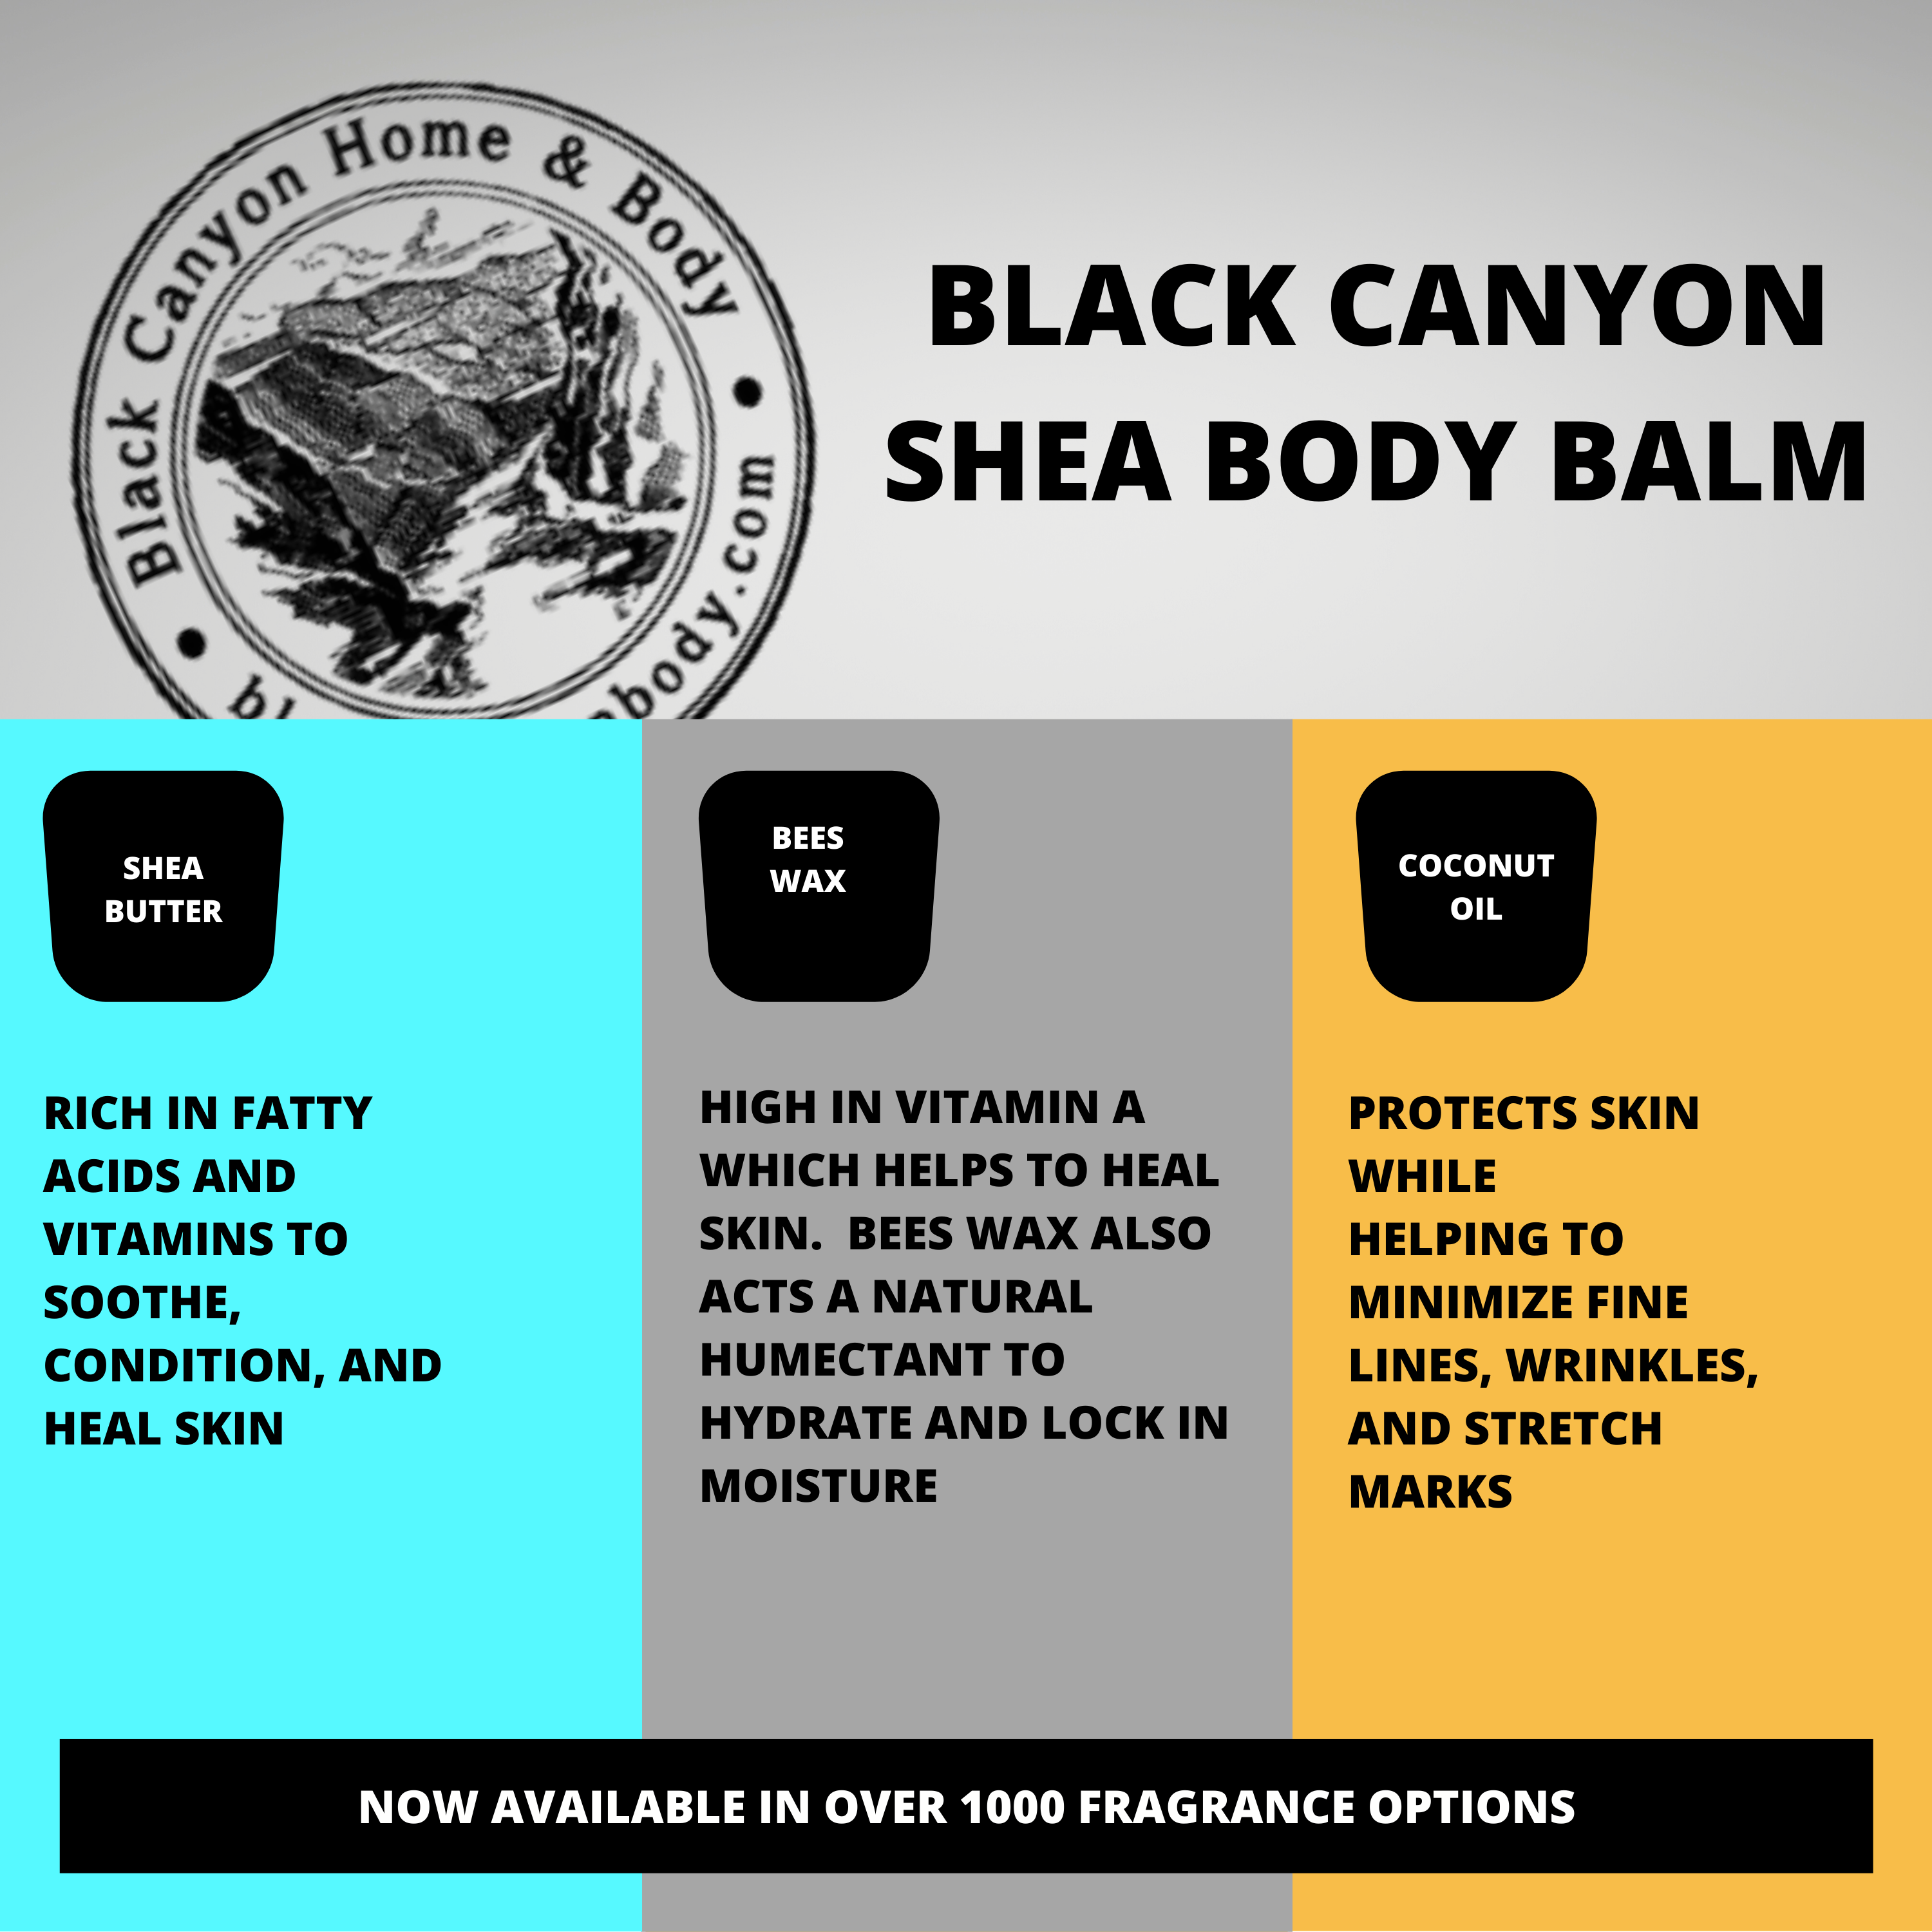 Black Canyon Berries & Cream Scented Natural Body Balm with Shea